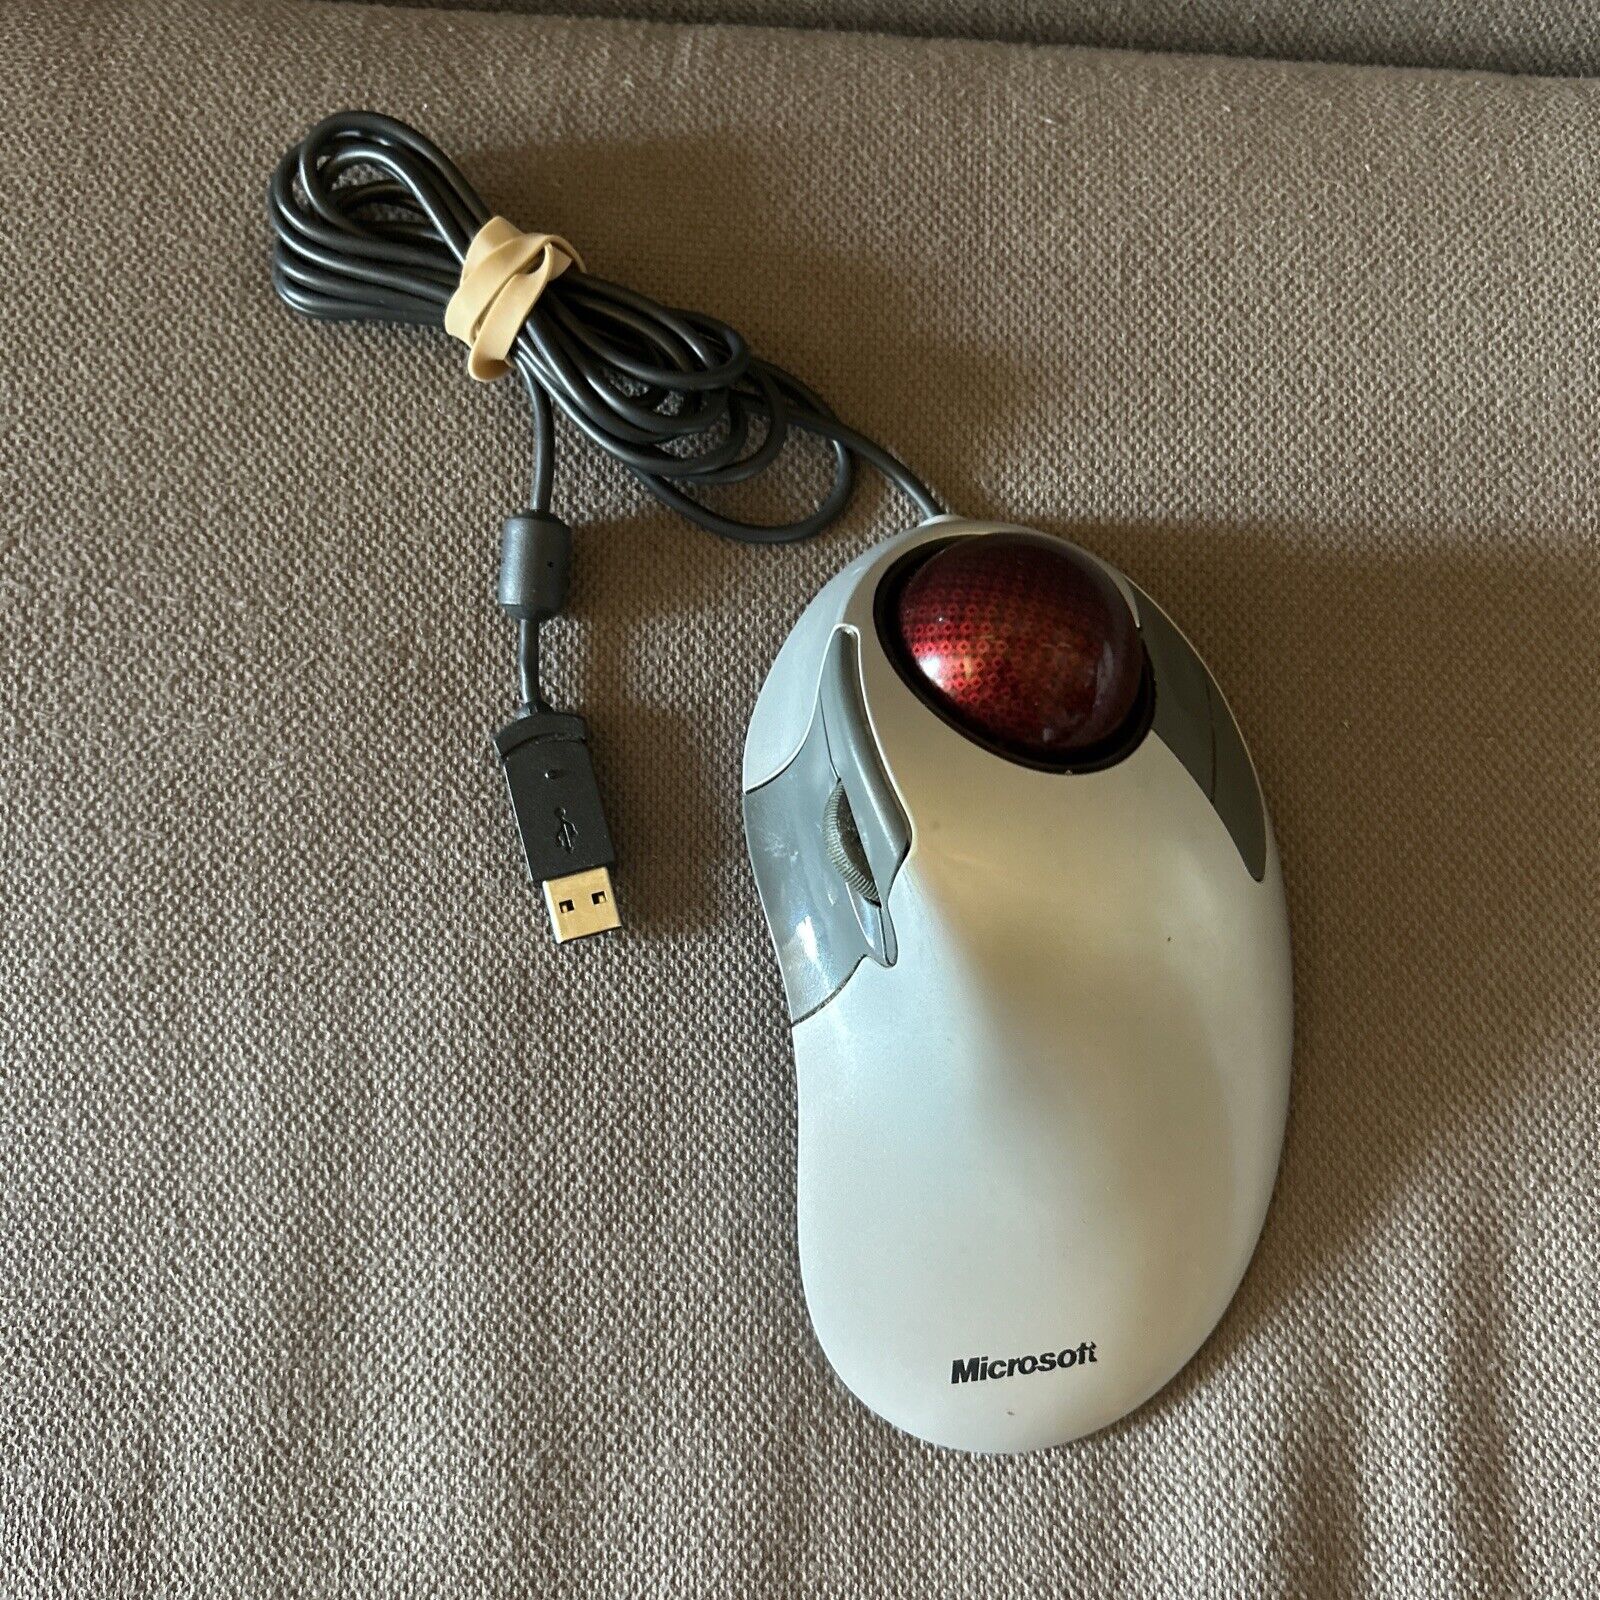 Microsoft Trackball Explorer 1.0 USB - FULLY TESTED GREAT CONDITION